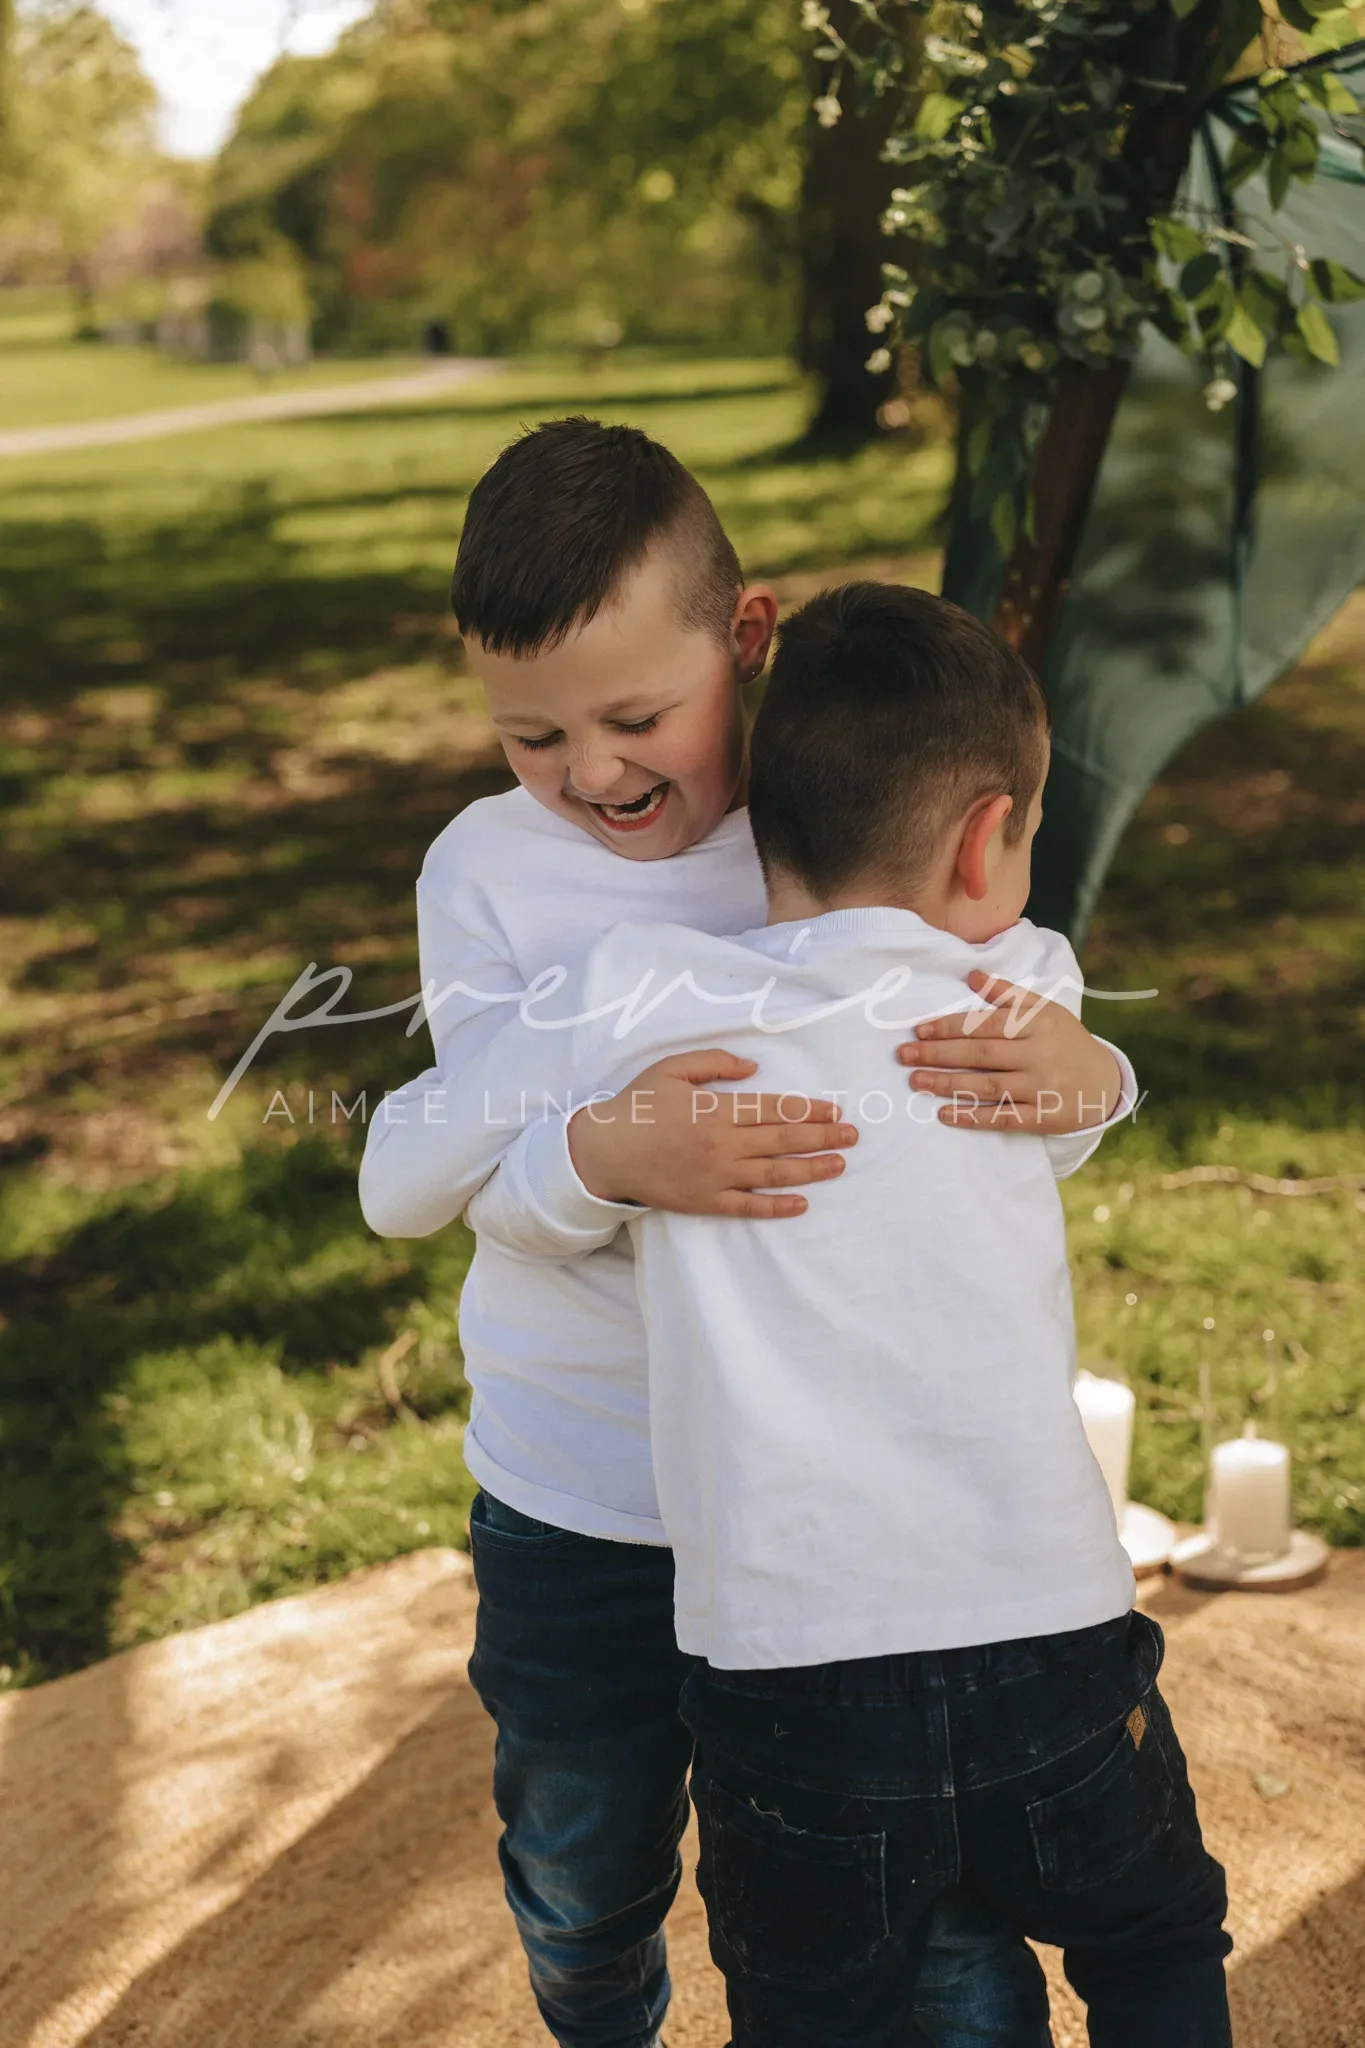 Two young boys hug joyfully in a park. the older boy, wearing a white shirt, smiles broadly as he embraces the younger boy in a blue shirt, whose back is to the camera. sunlight filters through trees in the background, enhancing a warm, cheerful atmosphere.